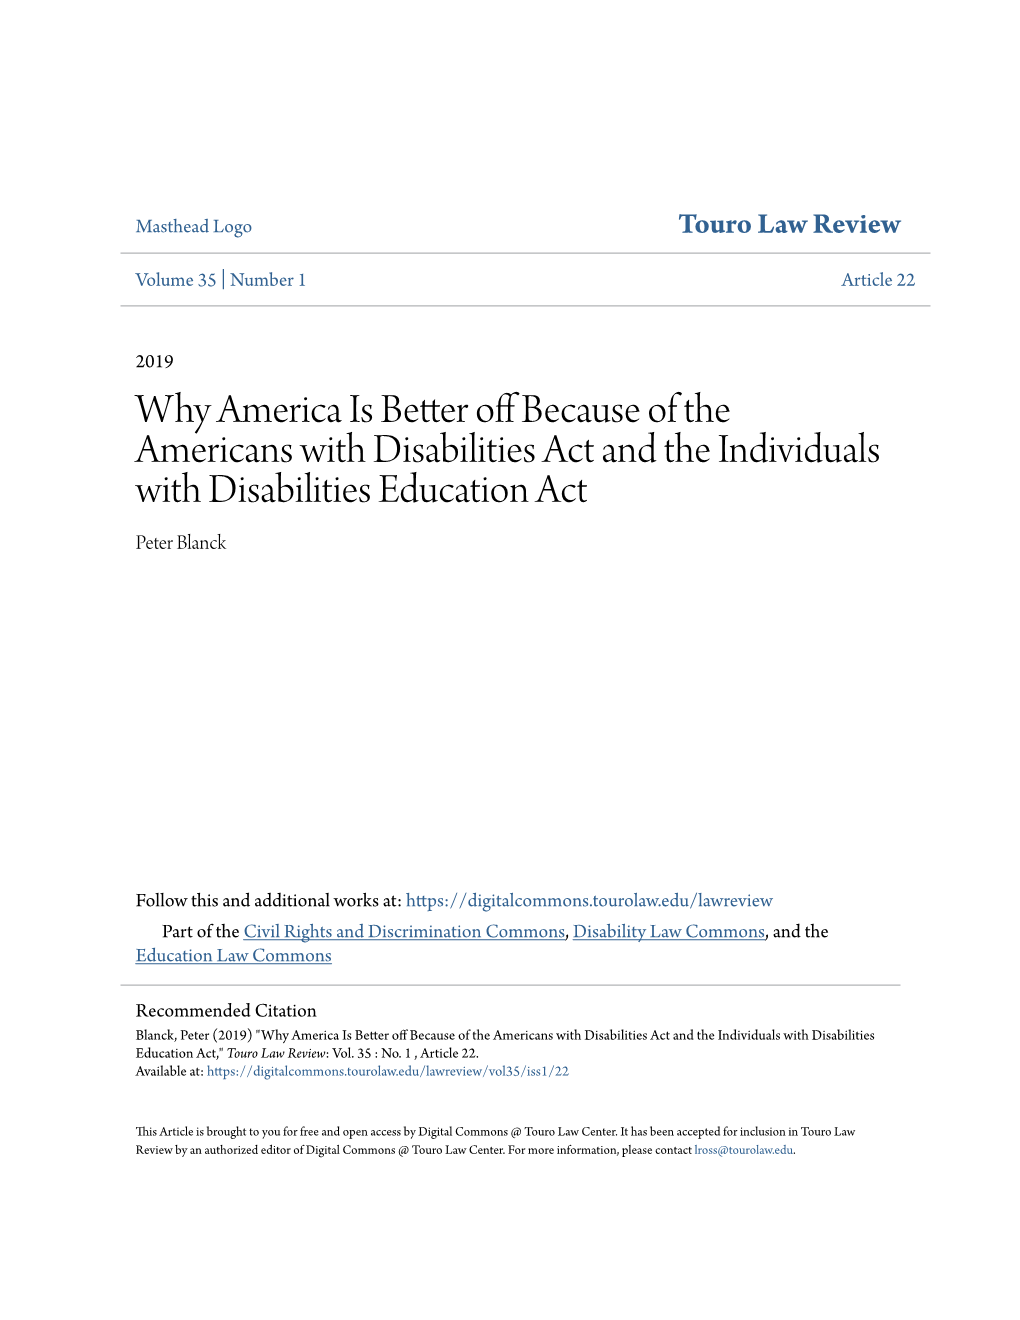 Why America Is Better Off Because of the Americans with Disabilities Act and the Individuals with Disabilities Education Act